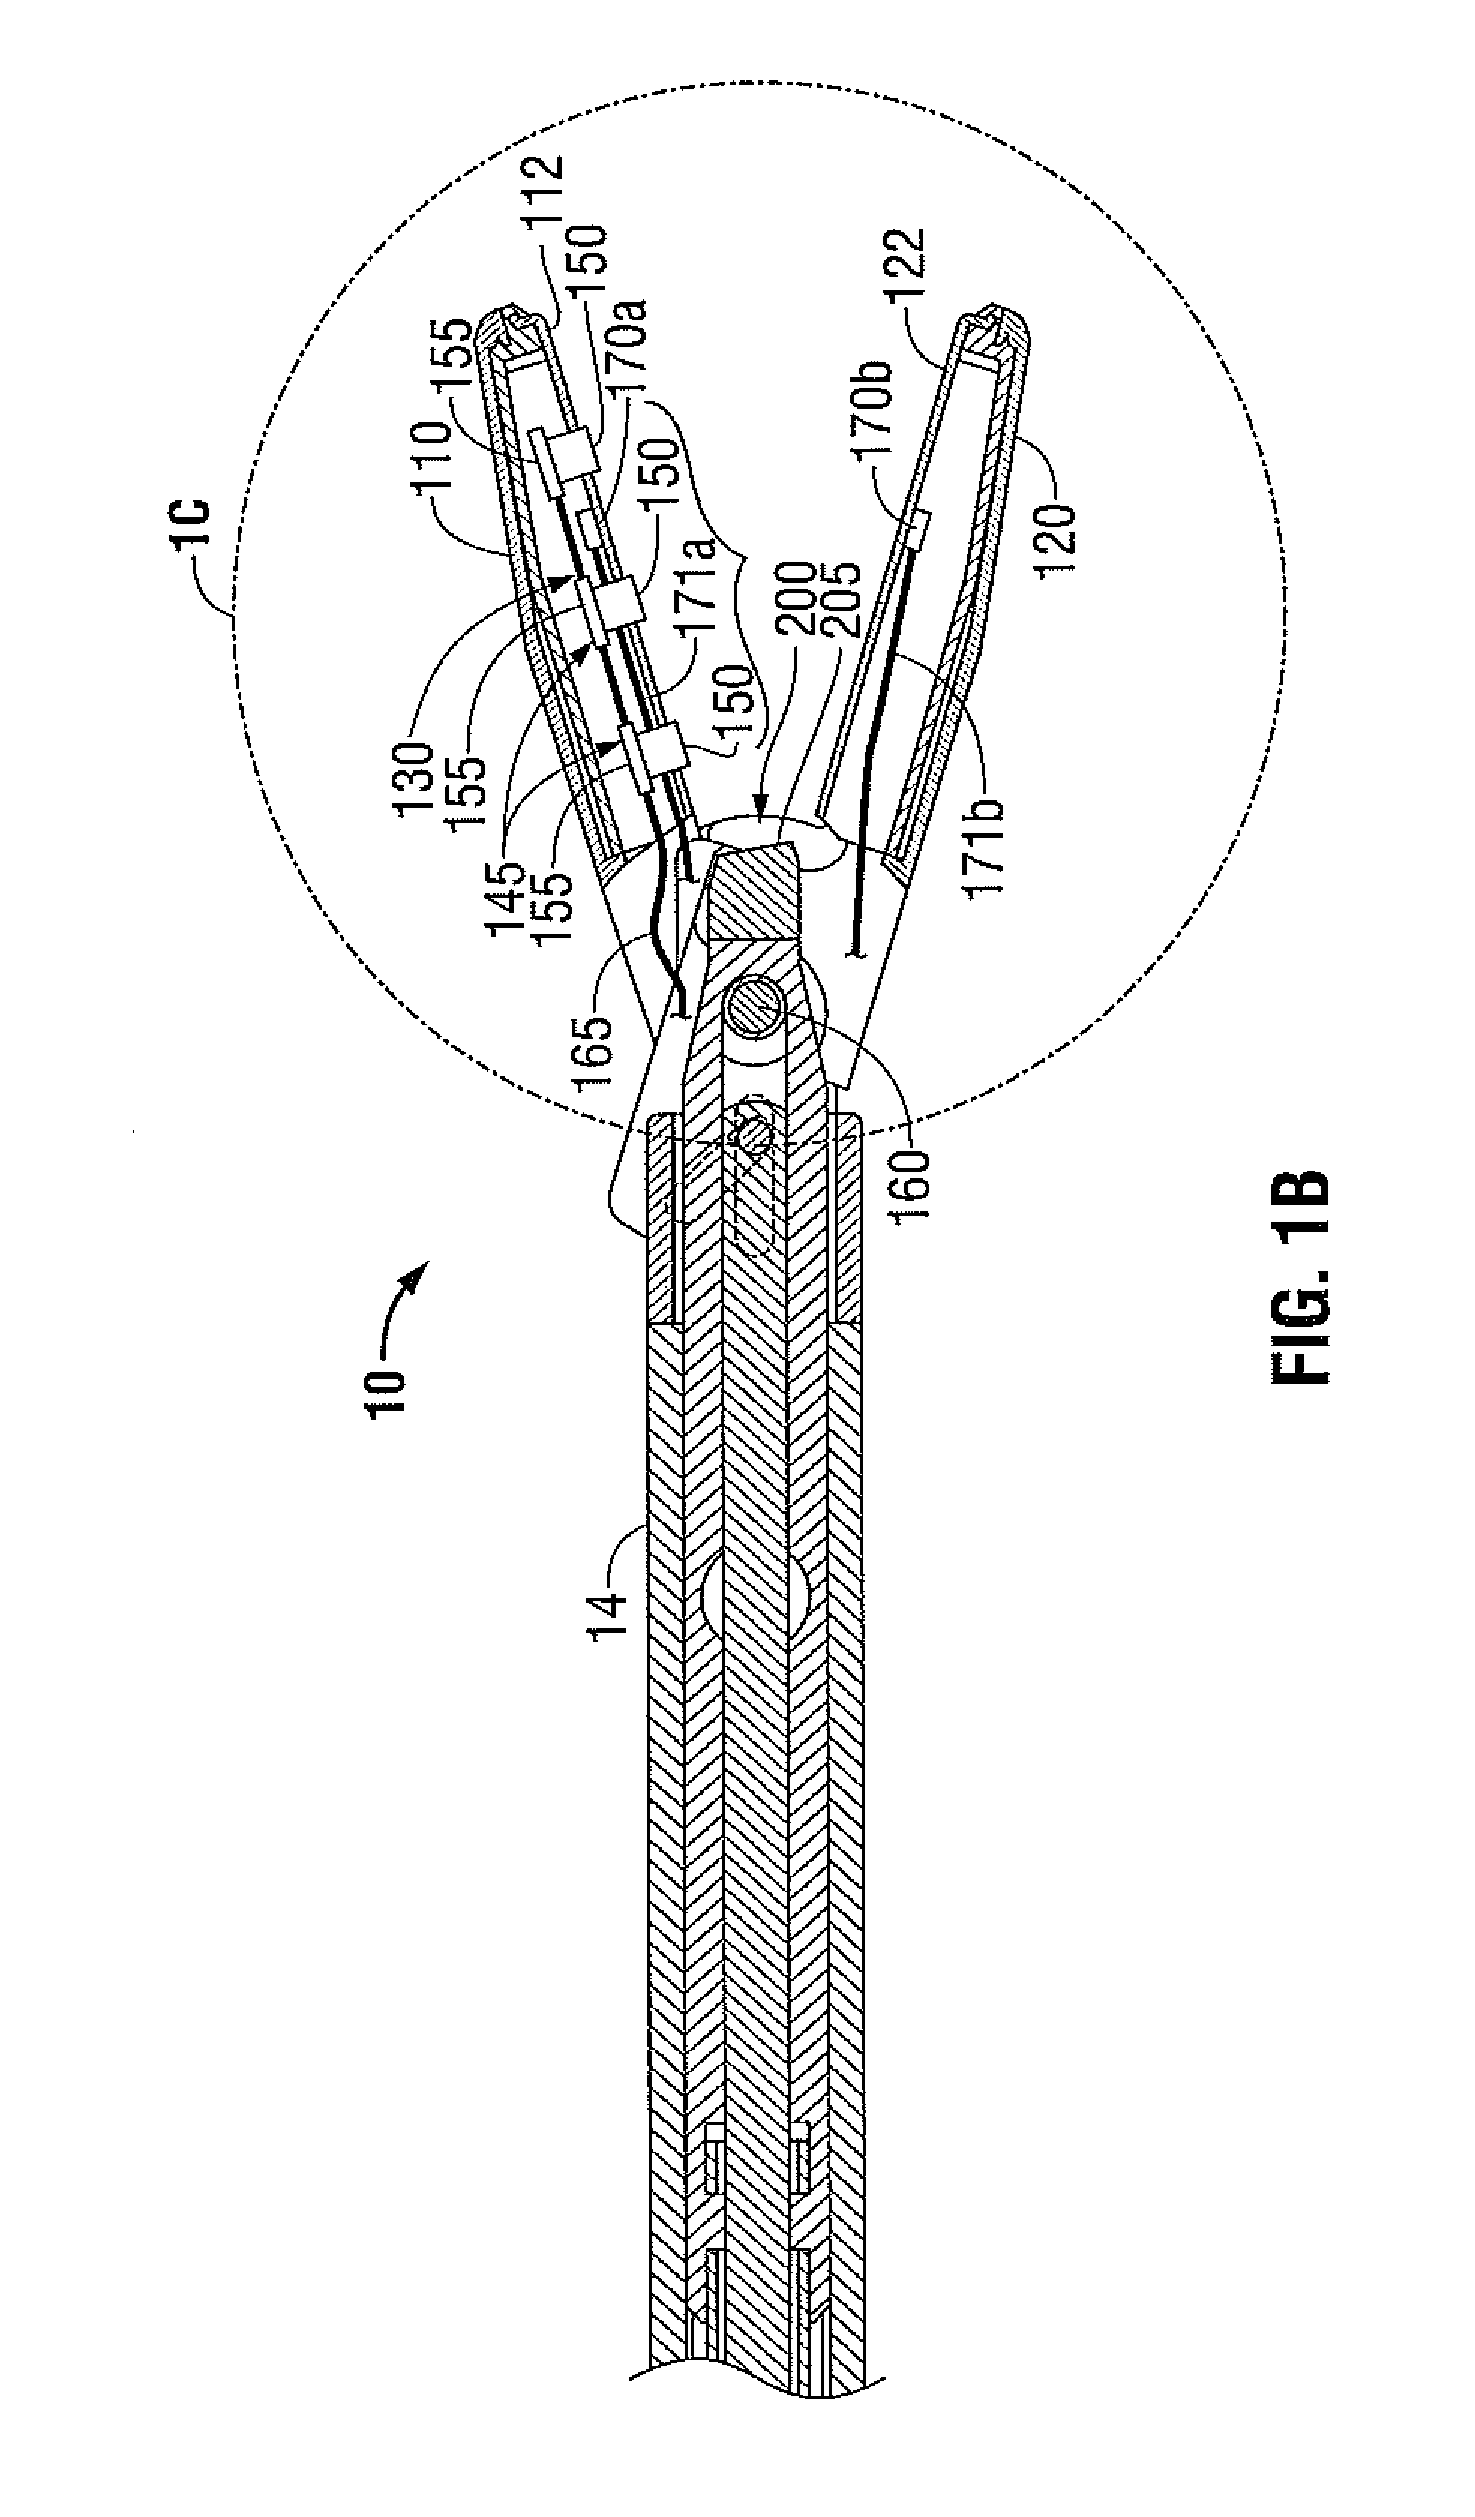 Electrosurgical Forceps with Slow Closure Sealing Plates and Method of Sealing Tissue